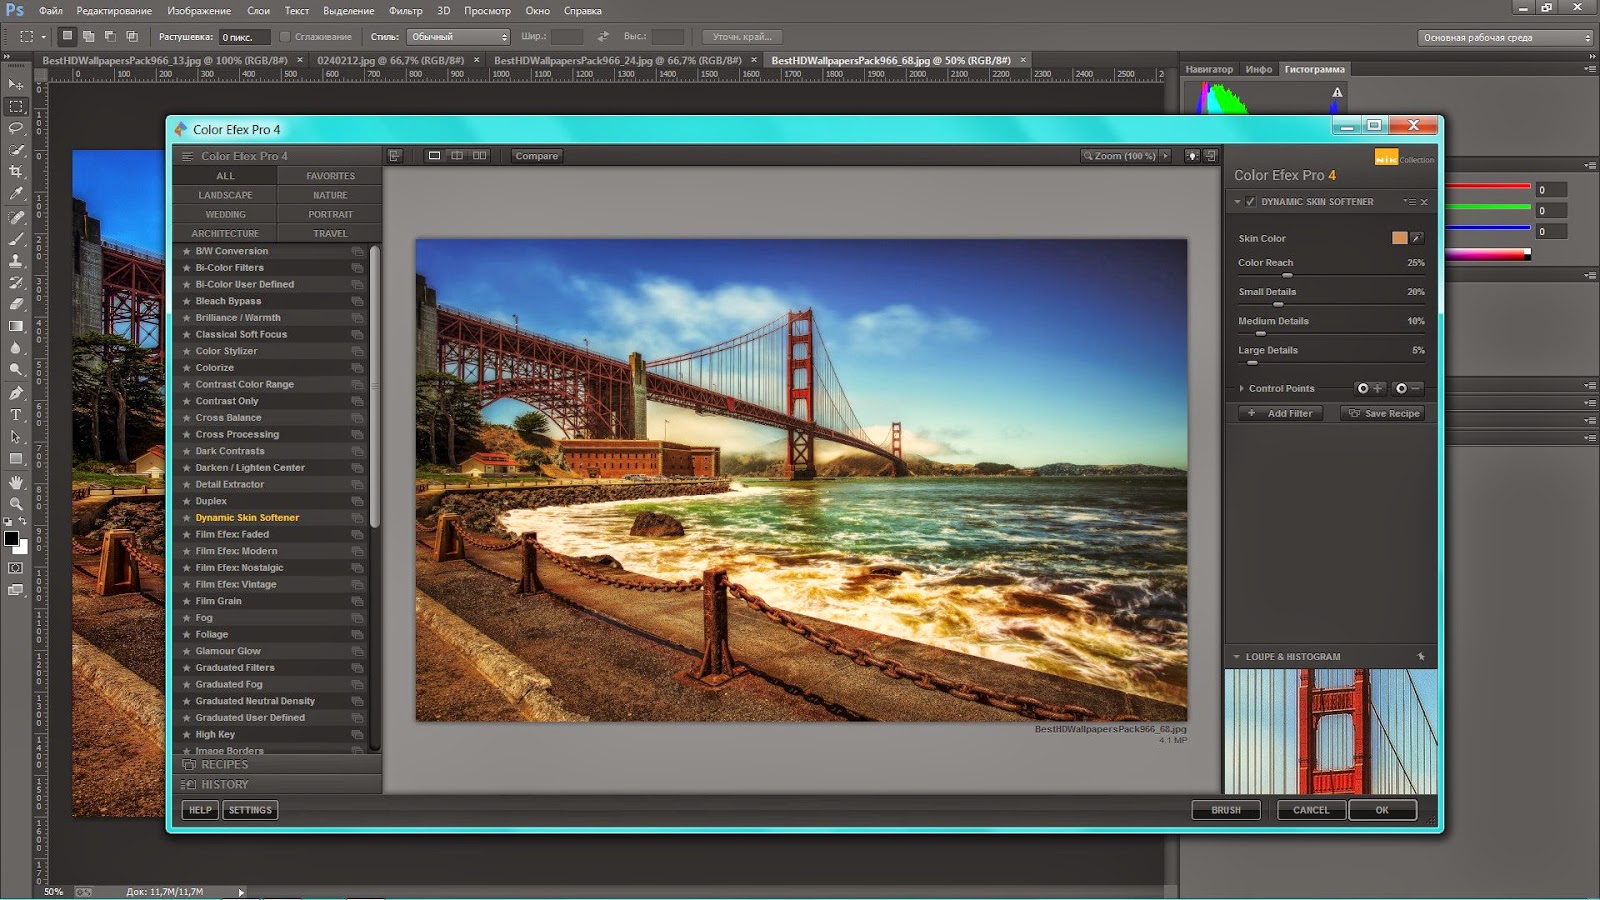 download adobe photoshop cc 2015 full version with crack